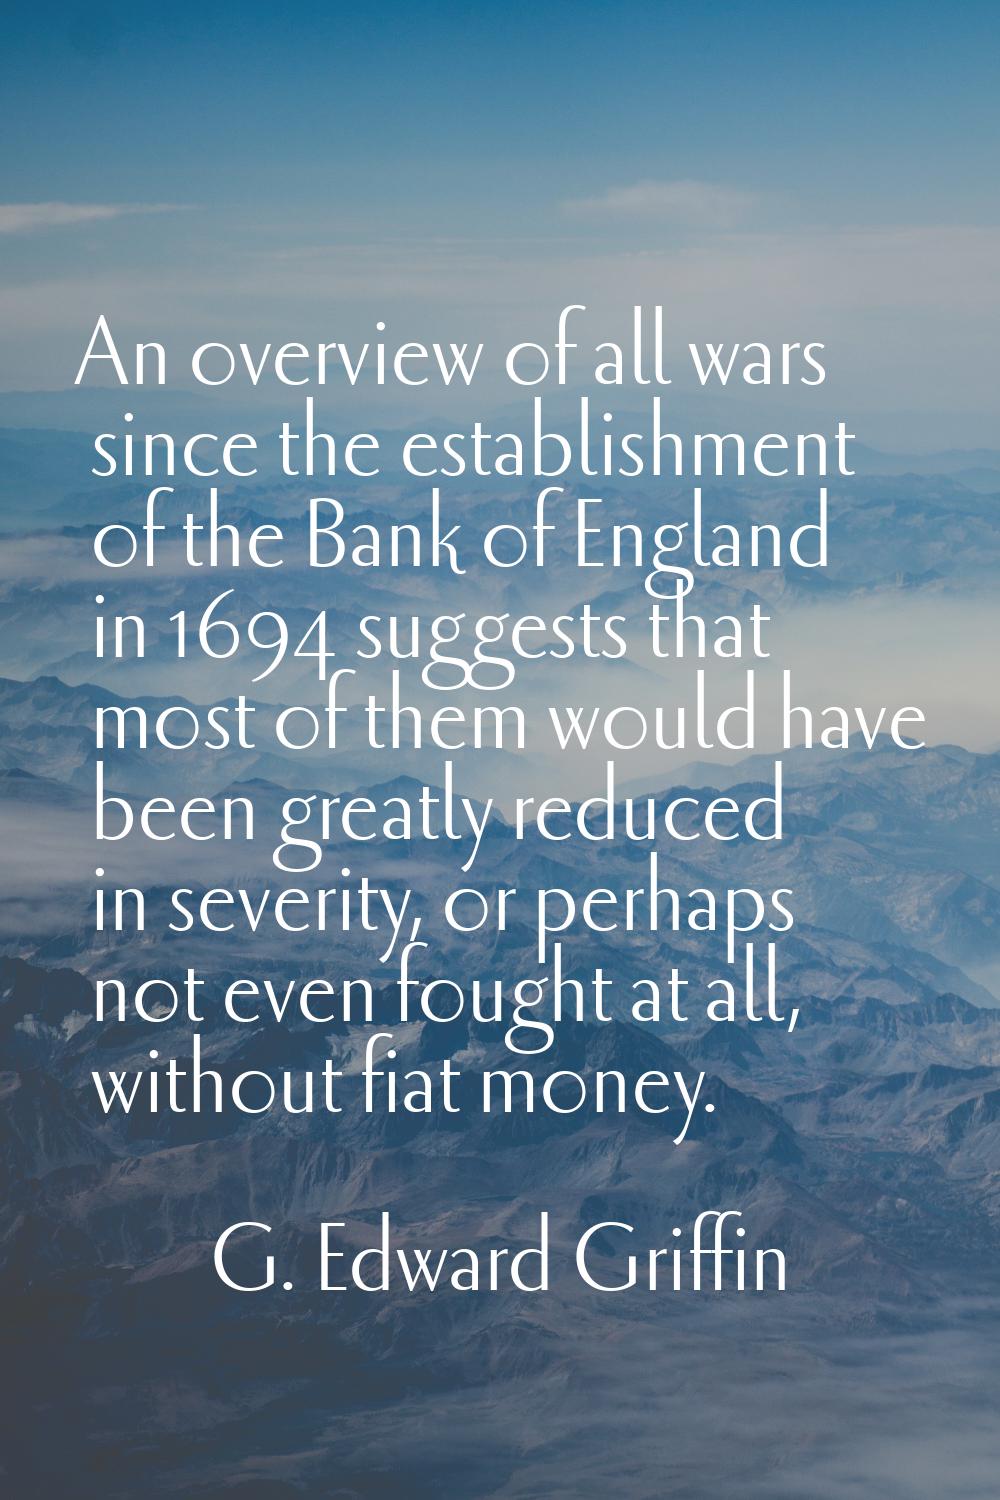 An overview of all wars since the establishment of the Bank of England in 1694 suggests that most o